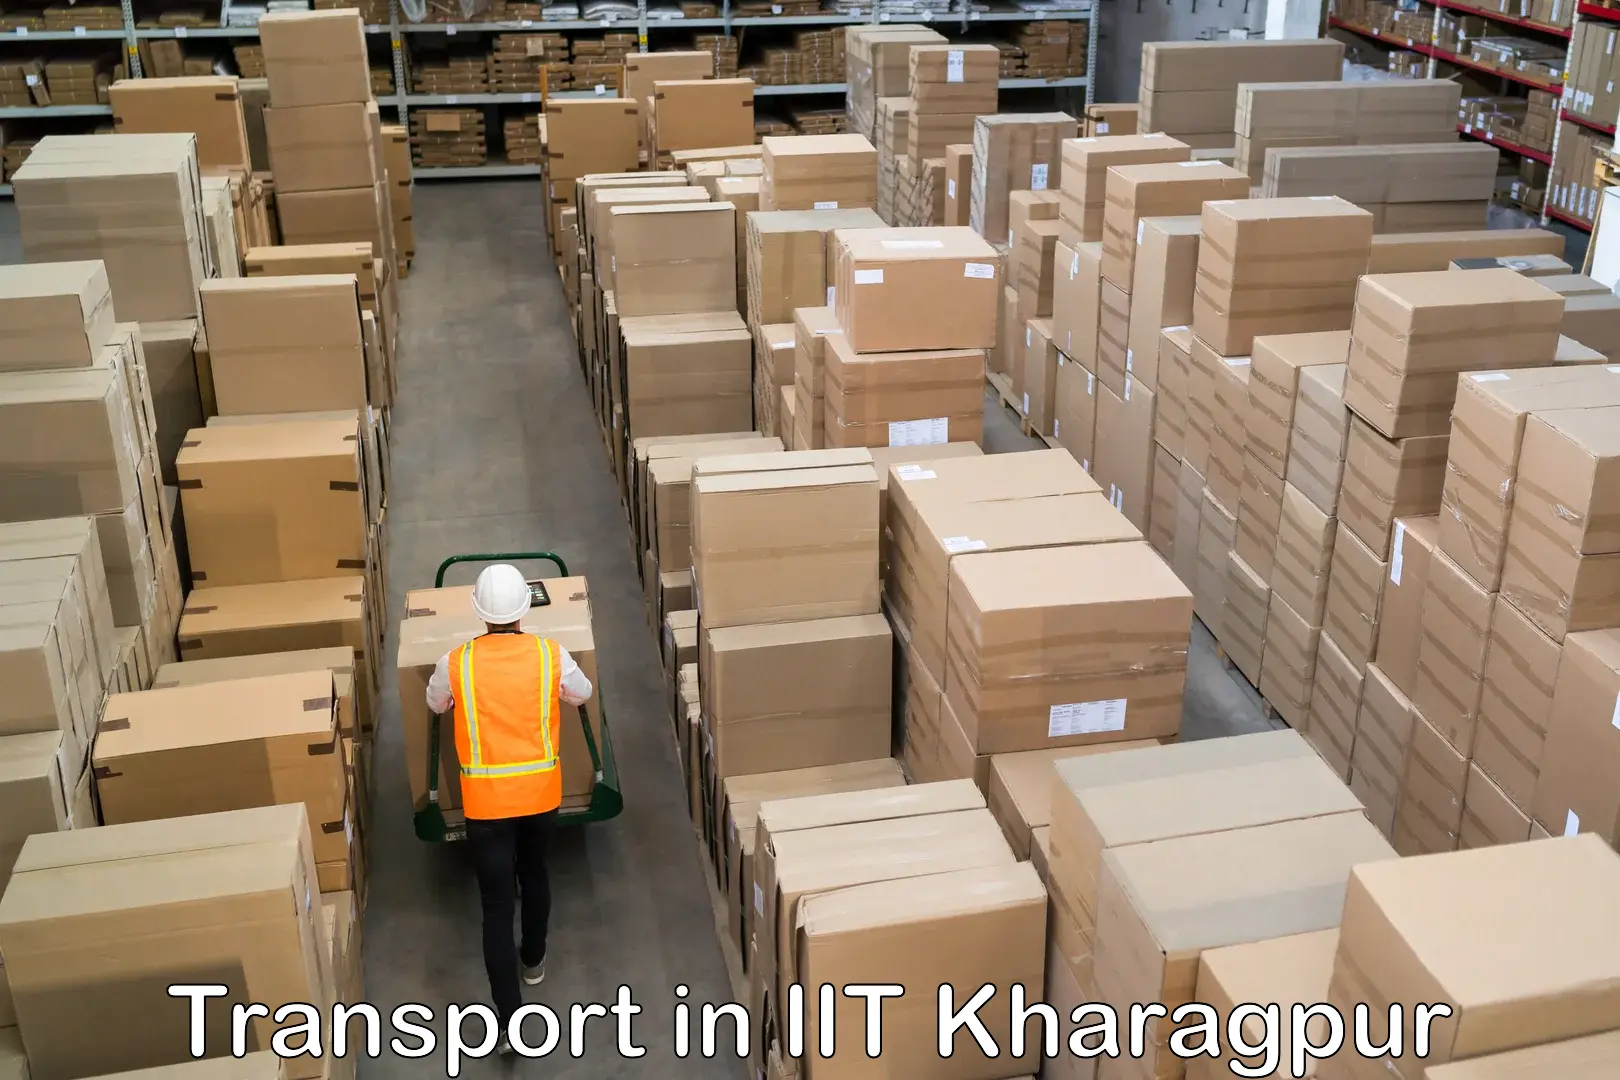 Daily parcel service transport in IIT Kharagpur